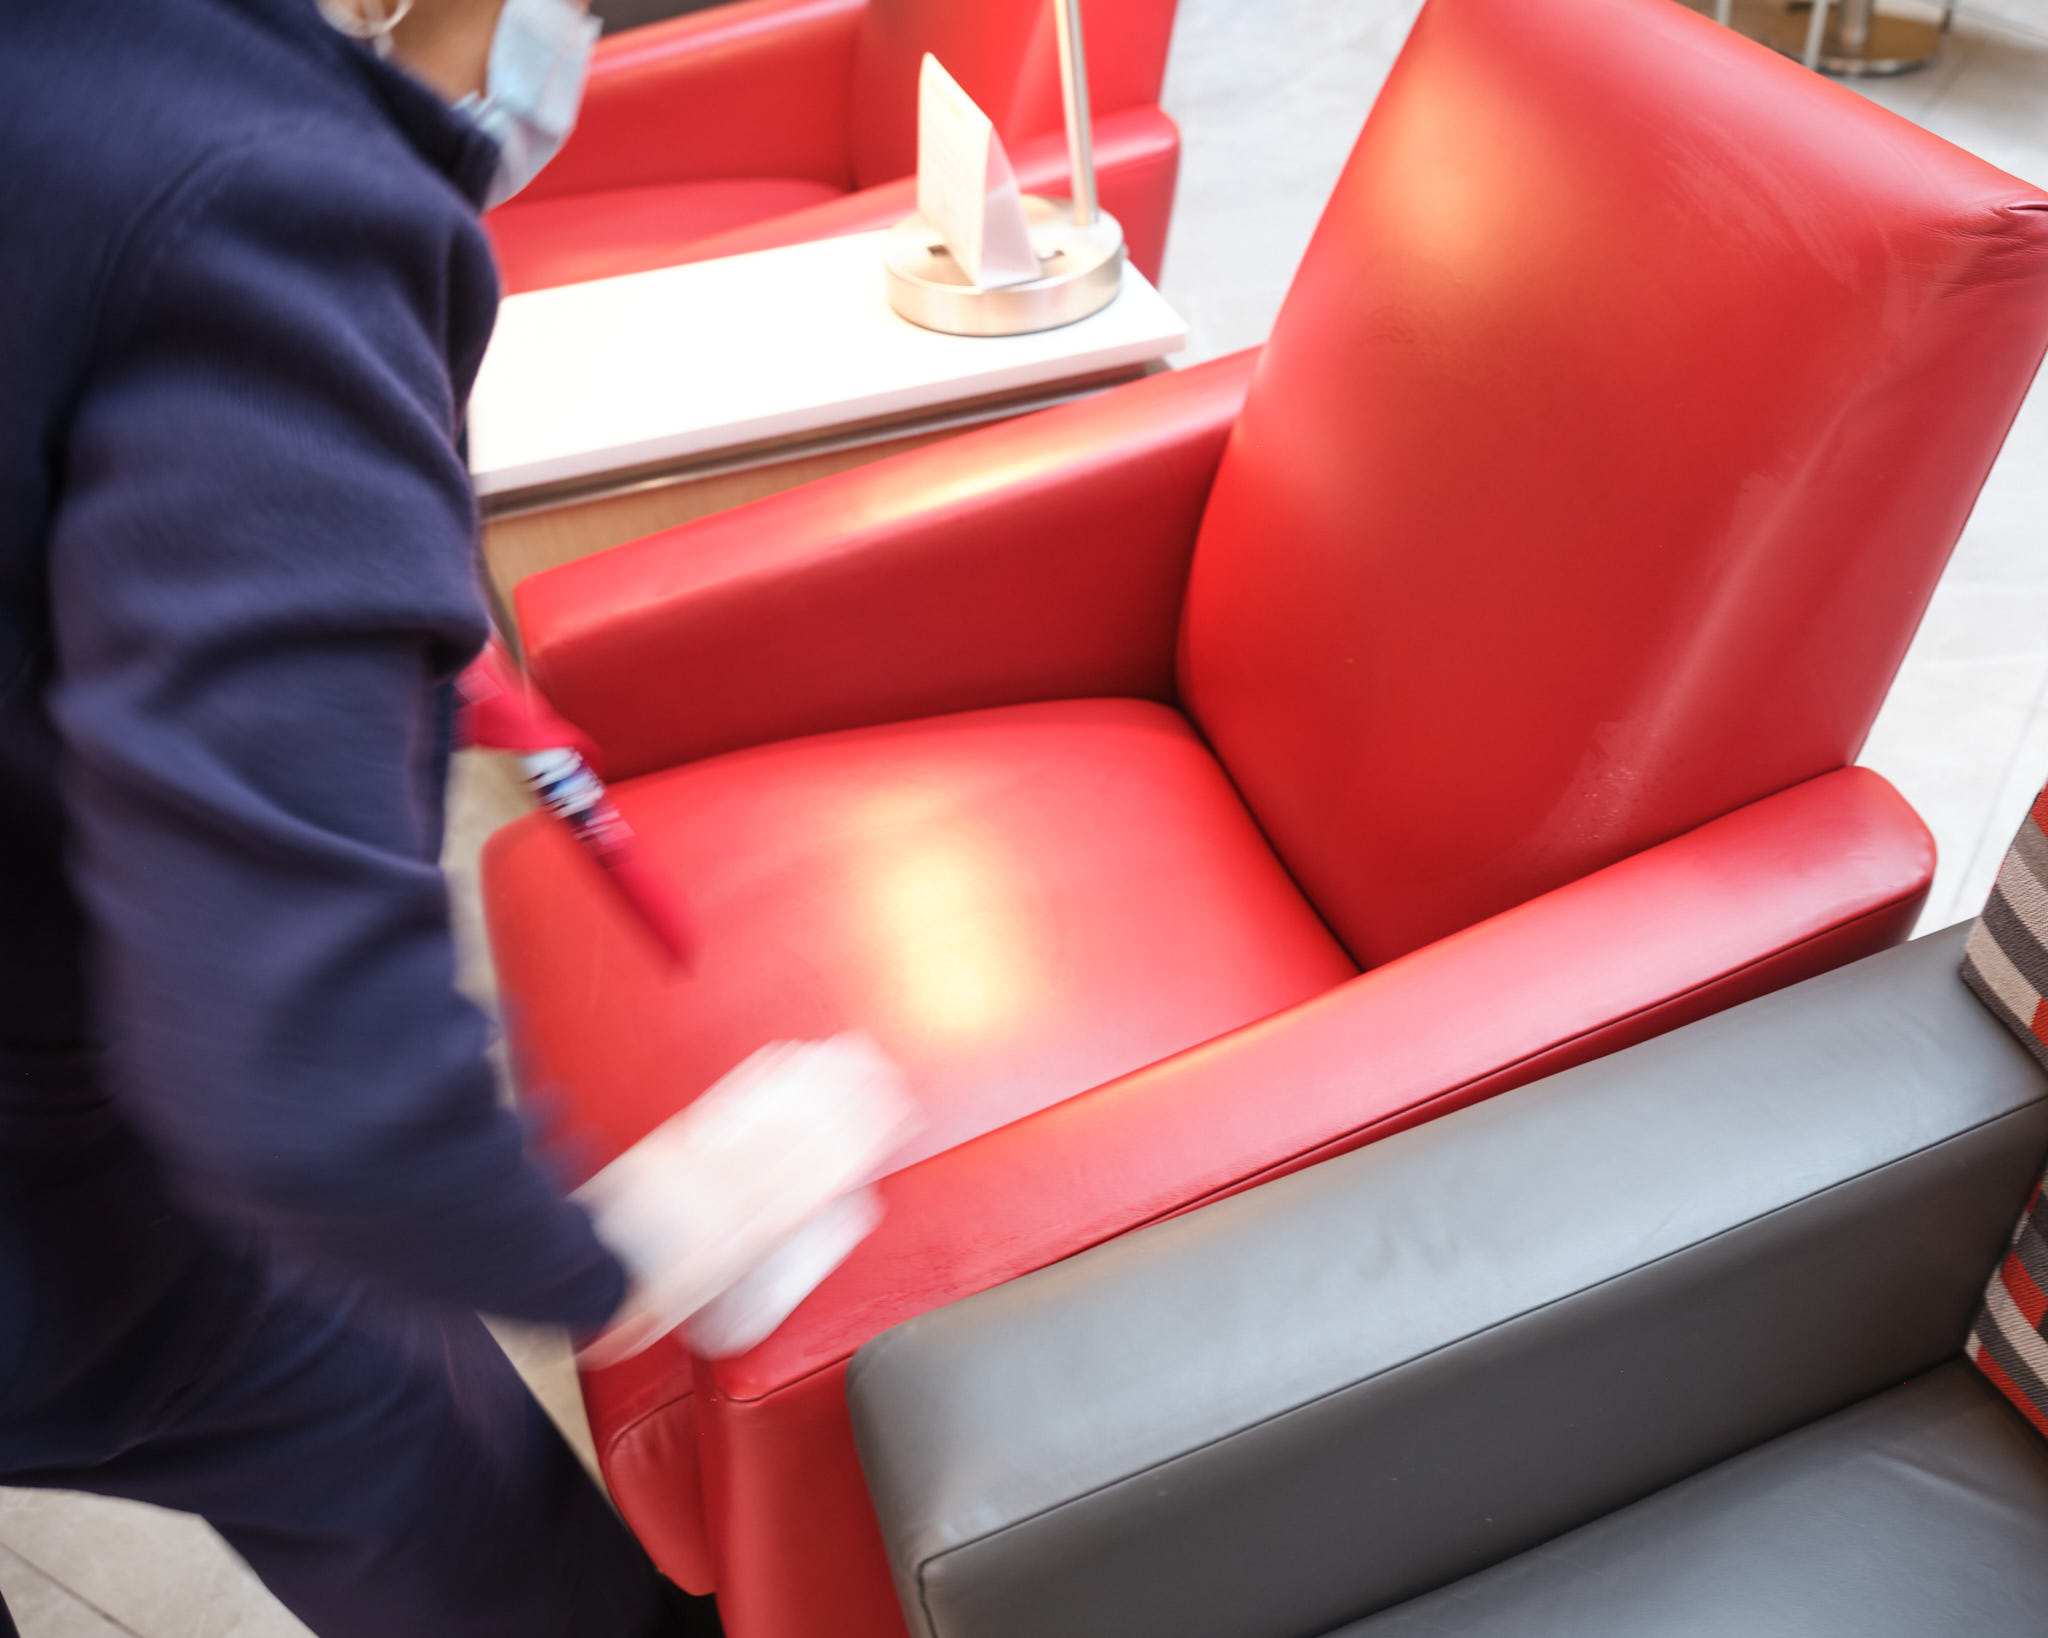 a person cleaning a red chair